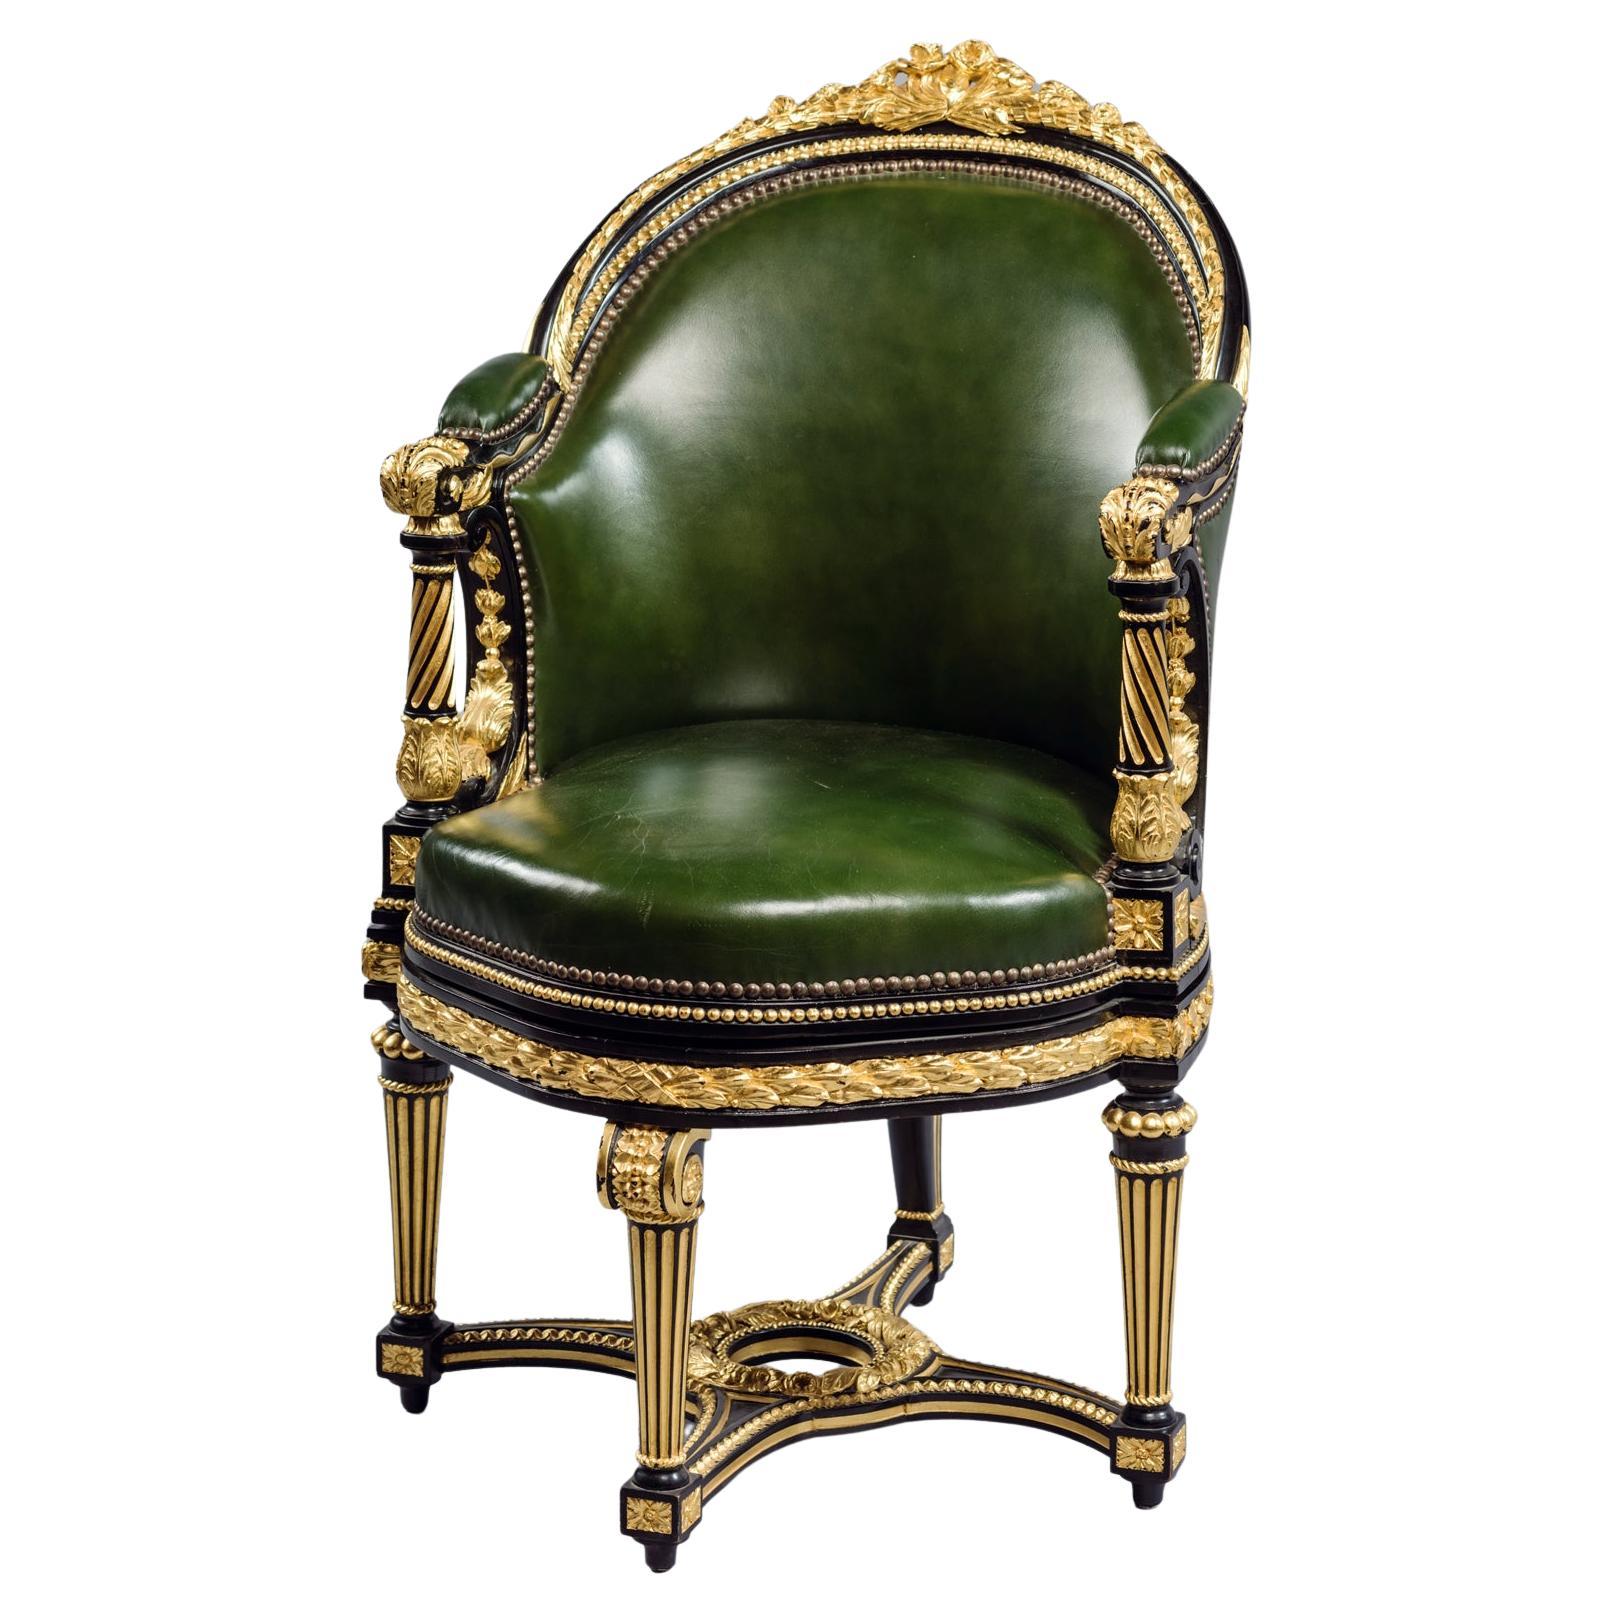 Louis XVI Style Rotating Desk Chair Upholstered in Green Leather